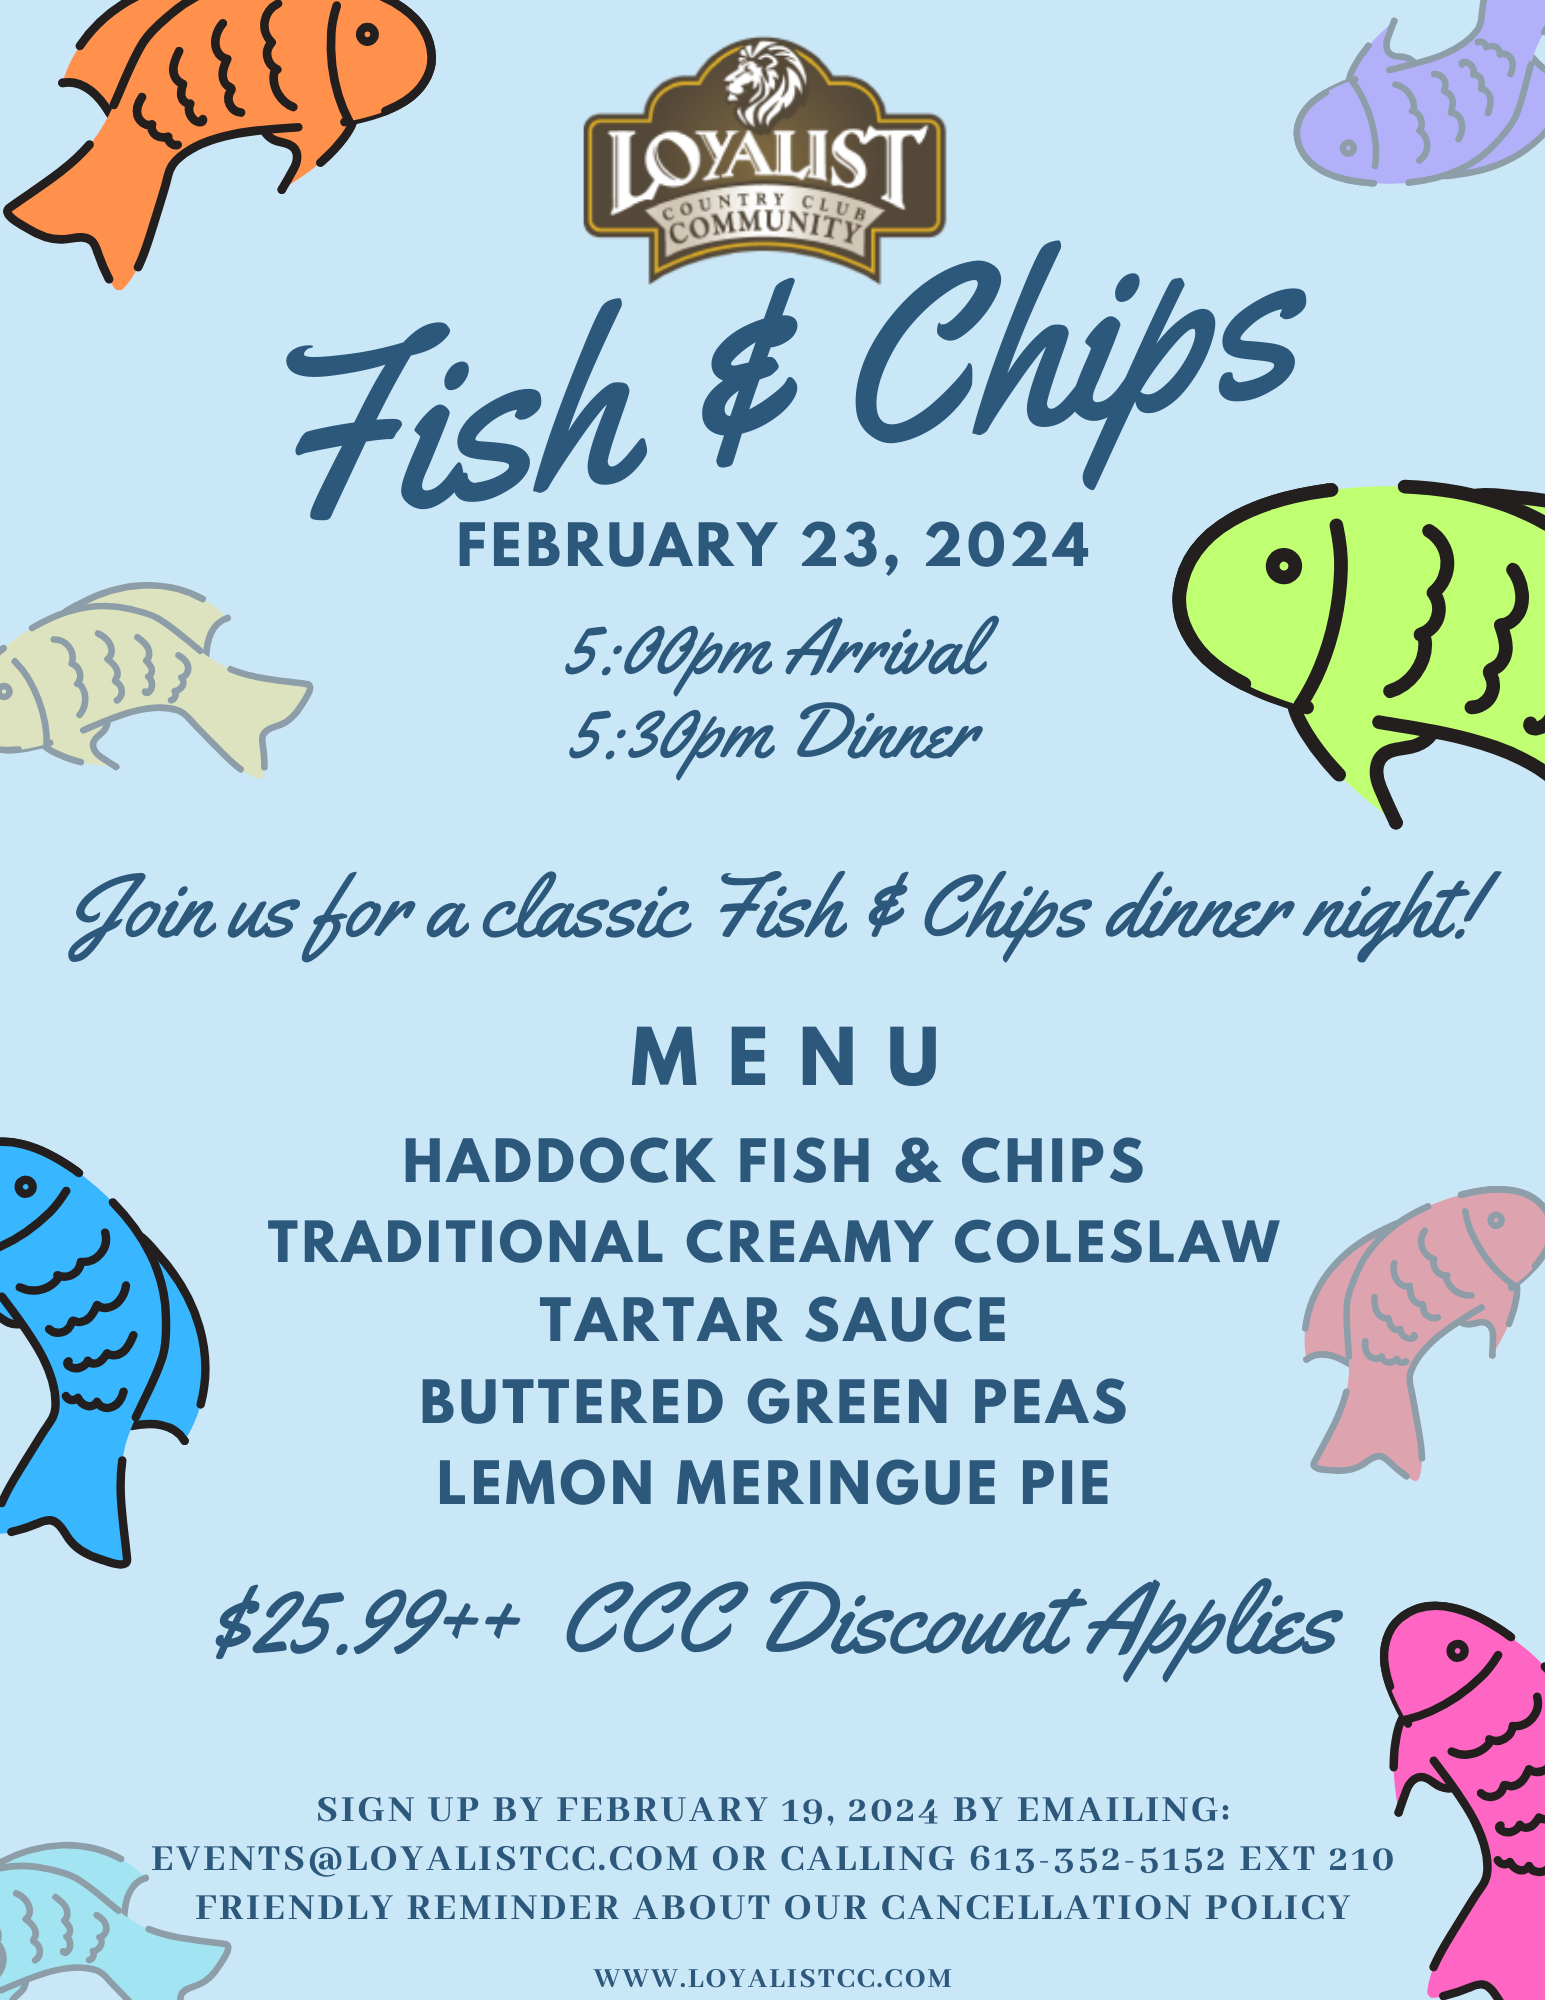 Loyalist Country Club is hosting a Fish & Chips night on February 23rd, 2024